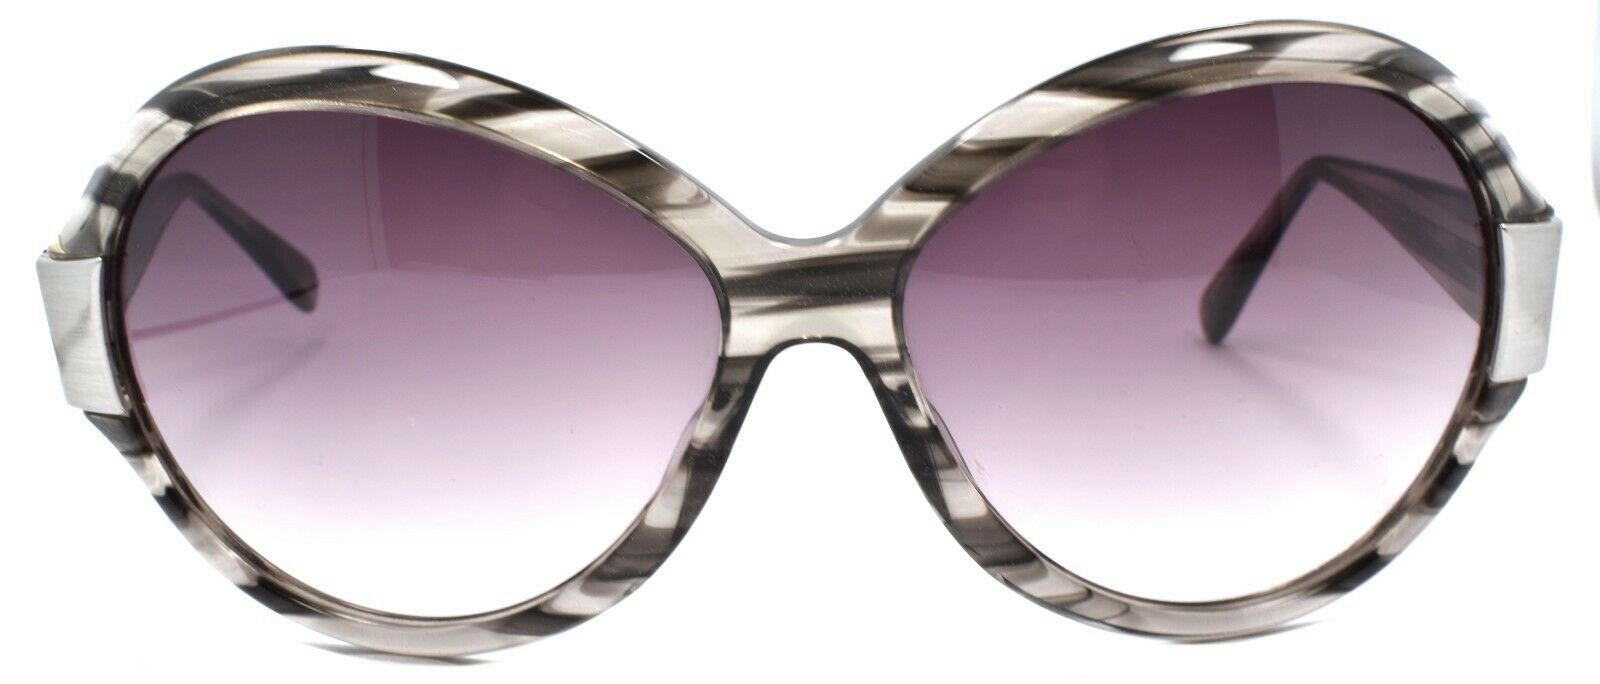 2-Oliver Peoples Harlot SG Women's Sunglasses Striped Gray / Purple Gradient-Does not apply-IKSpecs